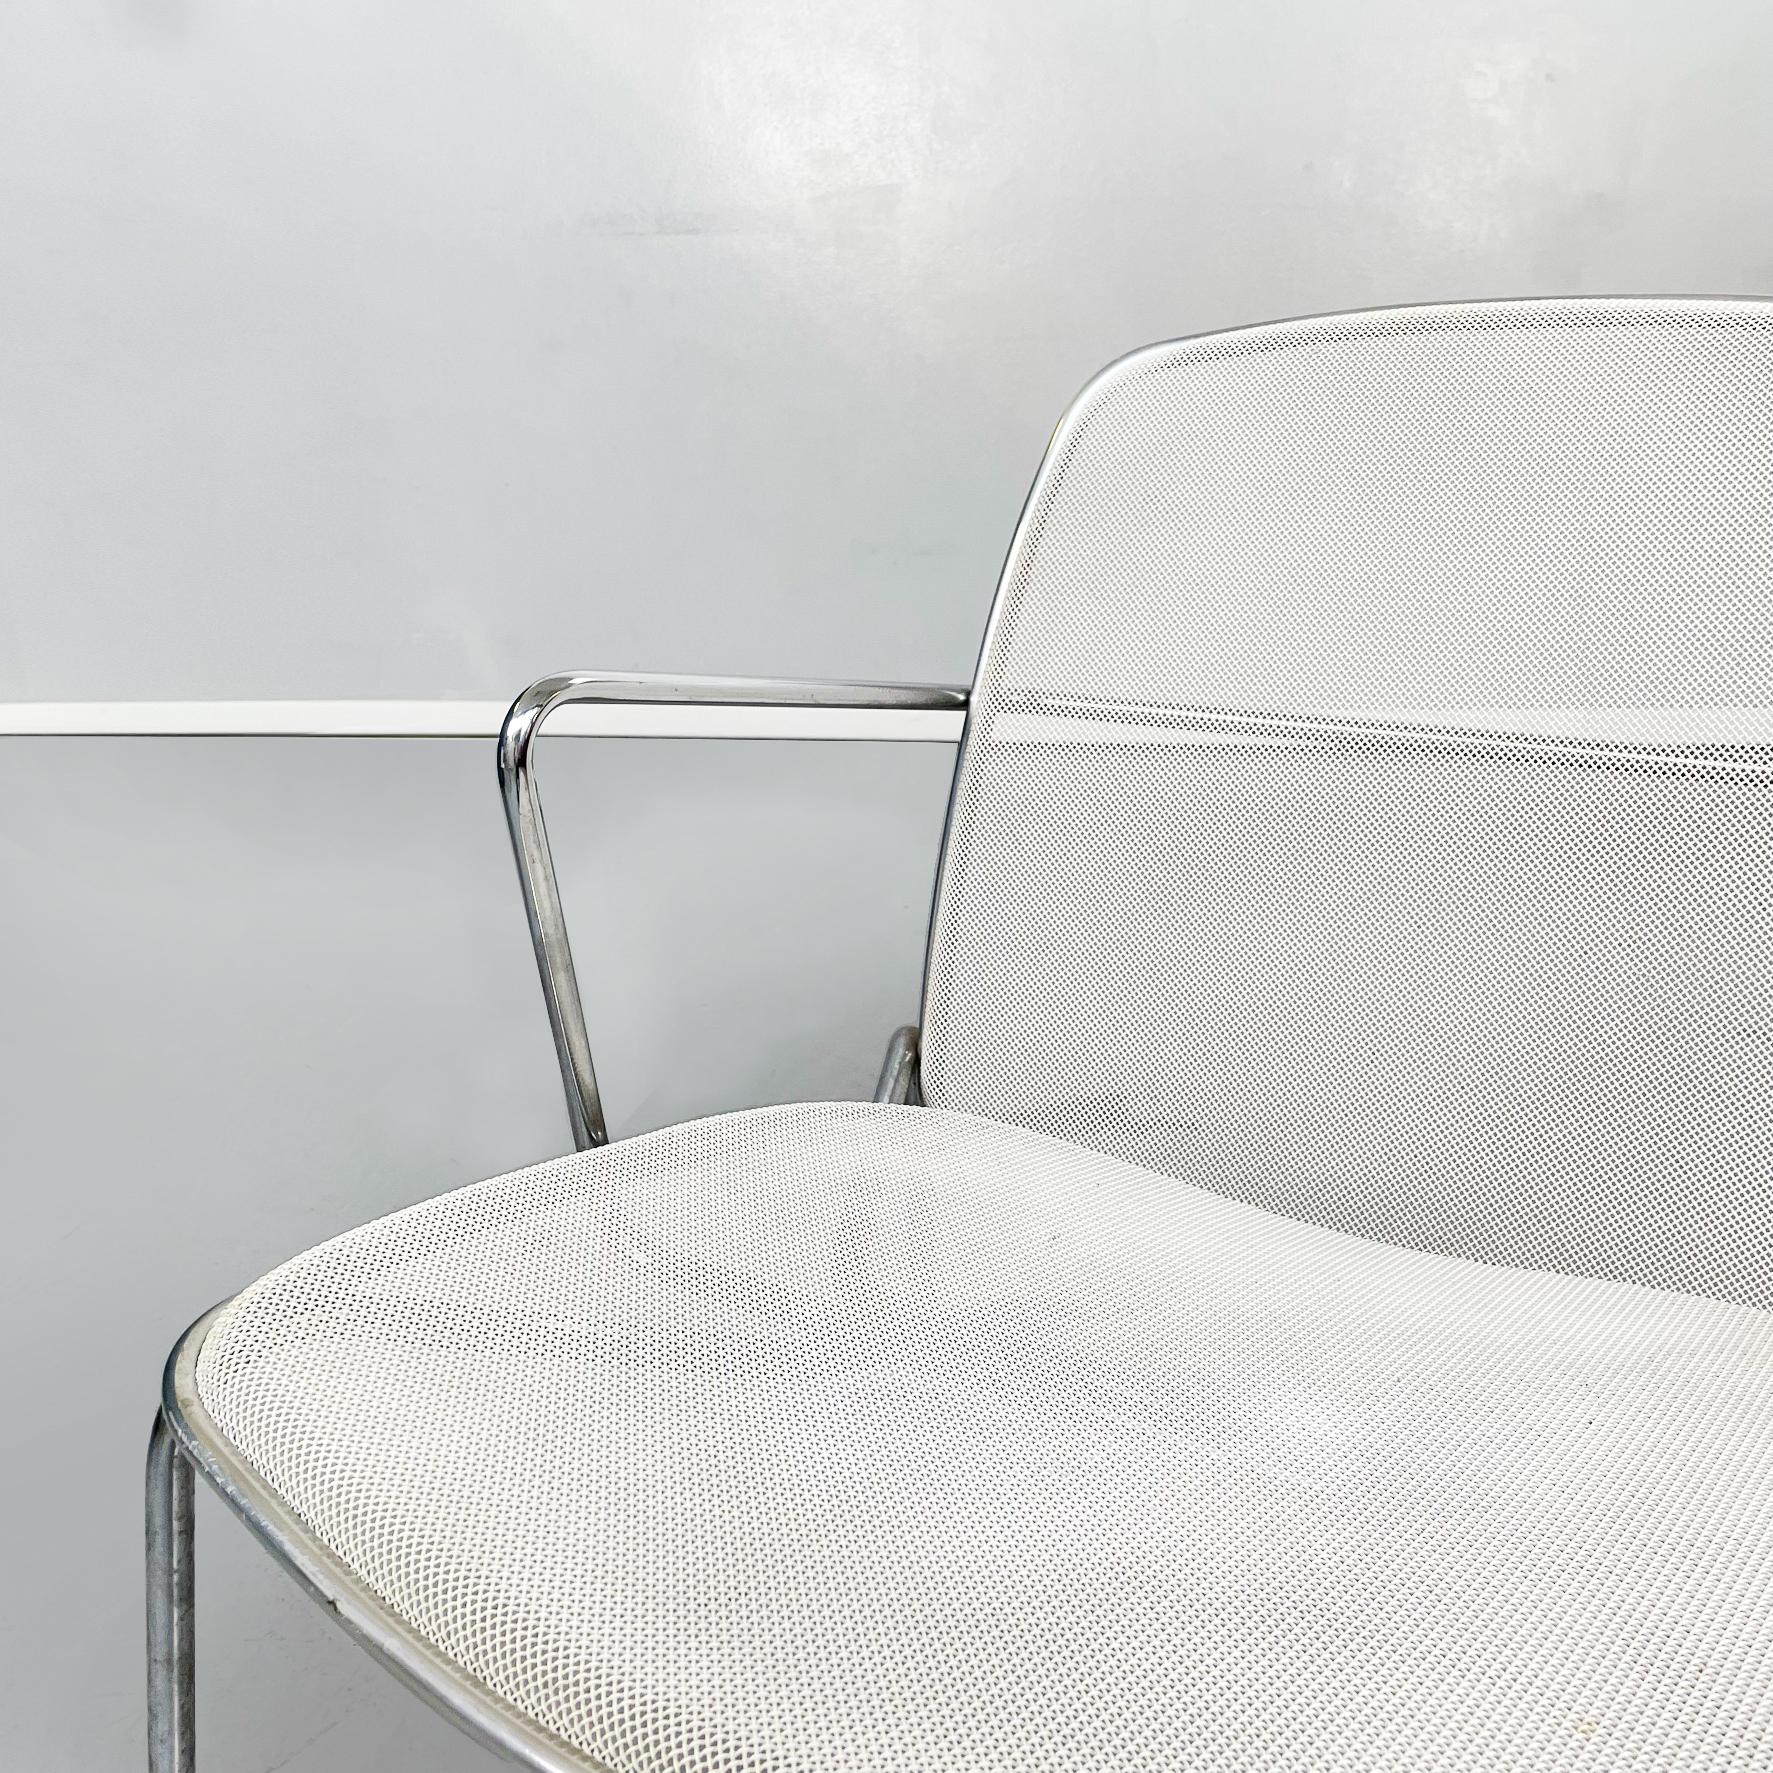 Italian 21st Century White Metal Steel Web Armchairs by Citterio for B&B, 2000s For Sale 1